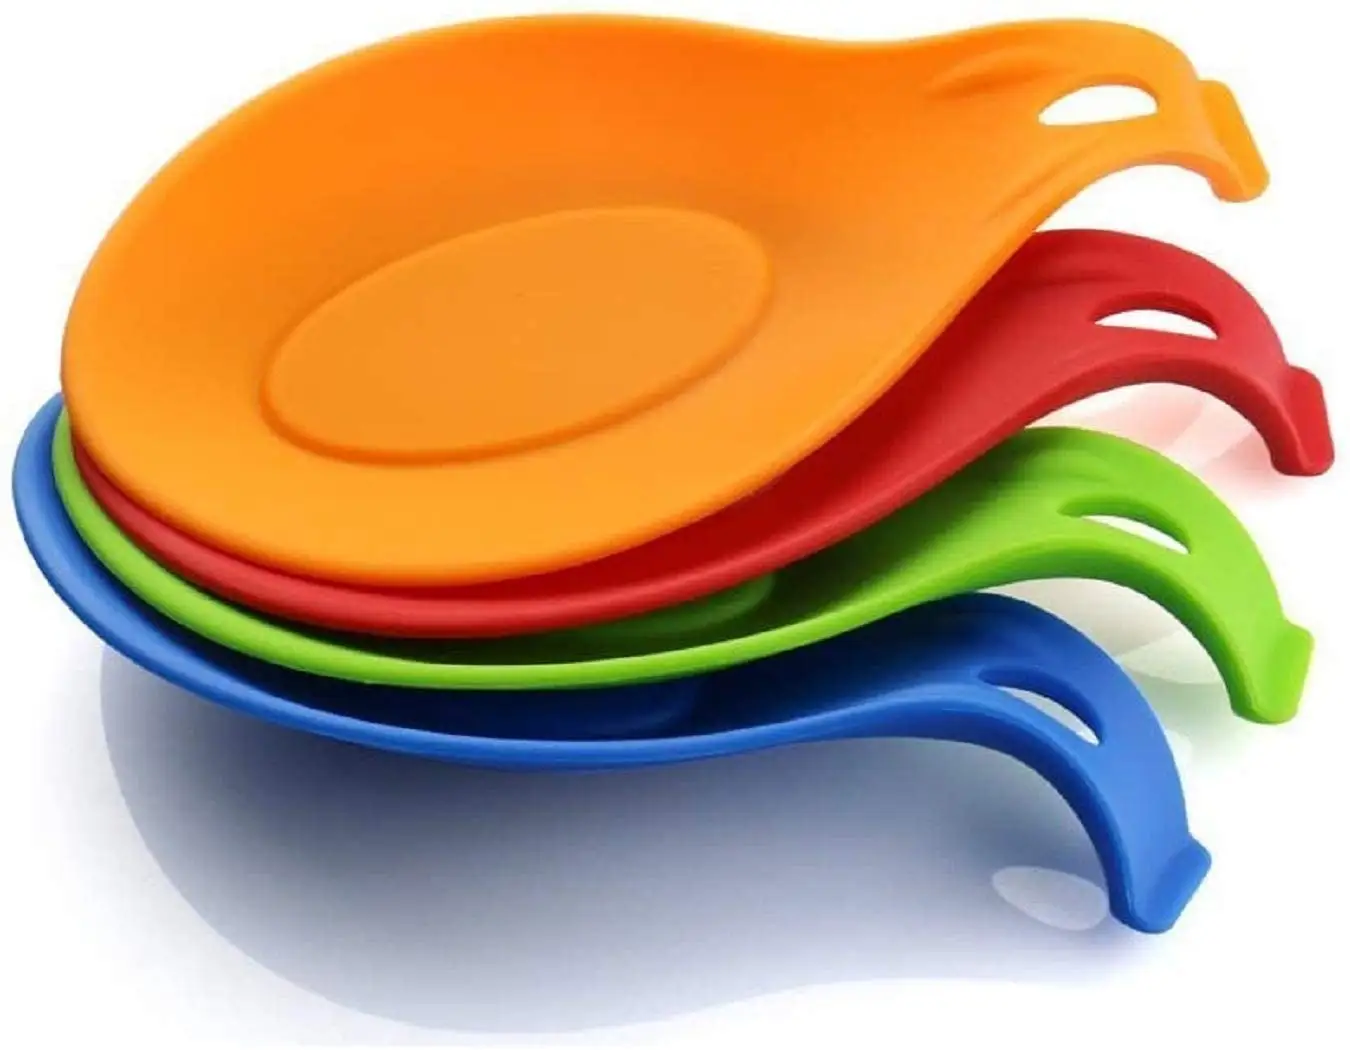 BHD Spoon-Shaped Nonstick Sturdy Silicone Stovetop Spoon Rest Counter Spatula Holder Dishwasher Safe Kitchen Utensil Rest